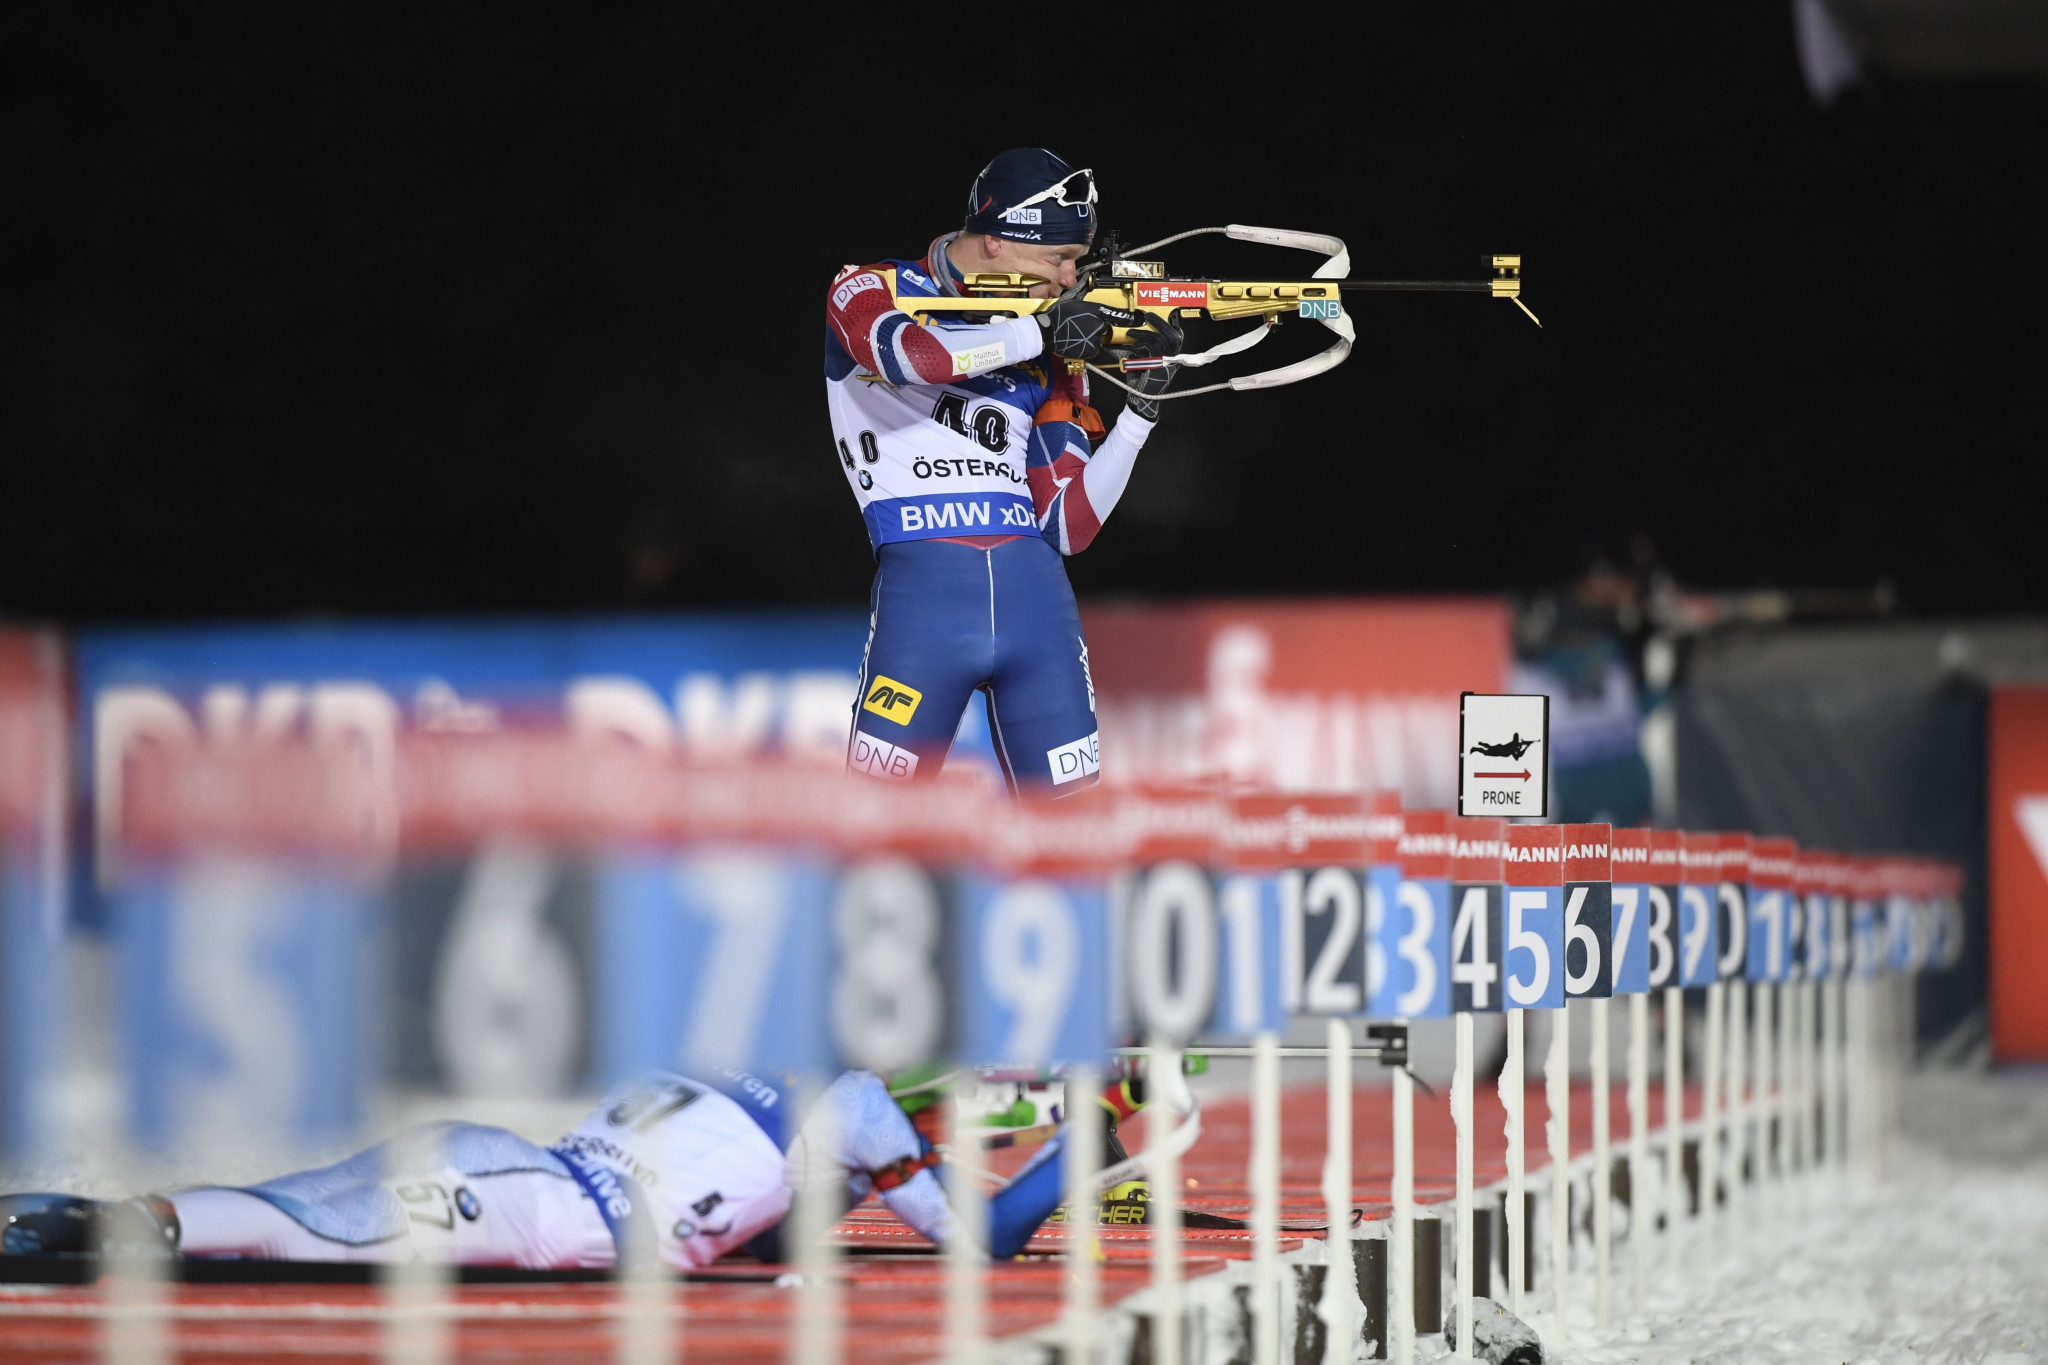 Norway's Johannes Thingnes Bø claimed victory in the first individual men's event of the season ©Getty Images